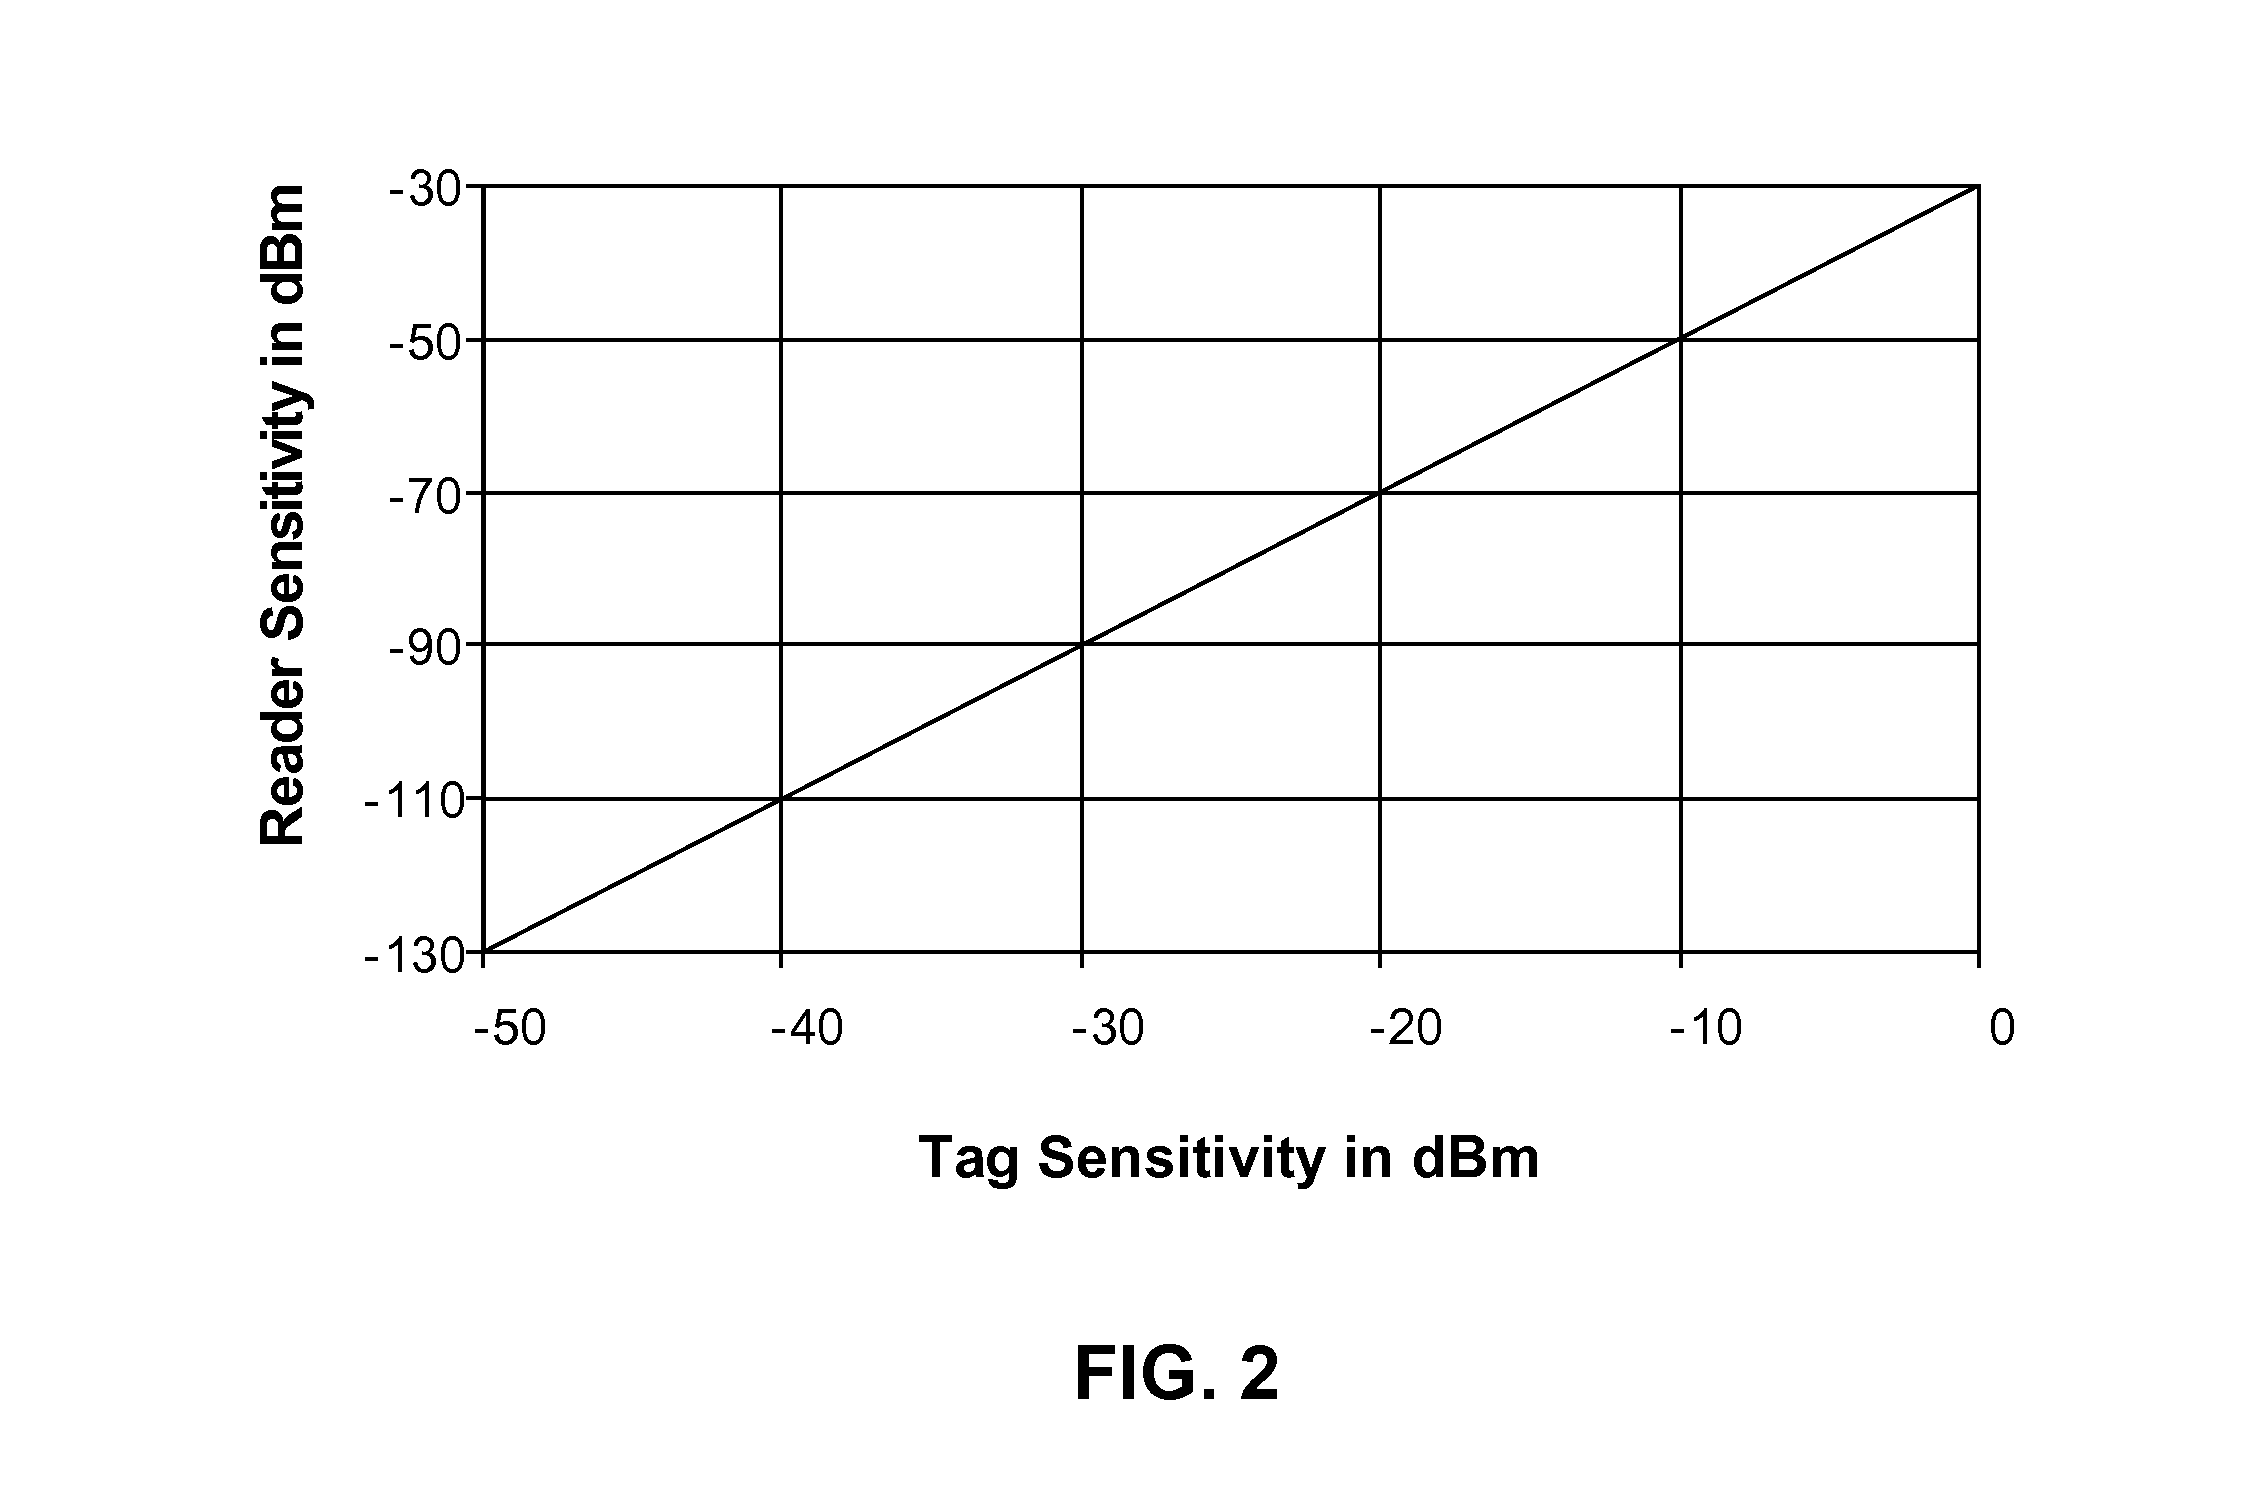 Battery assisted RFID system RF power control and interference mitigation methods